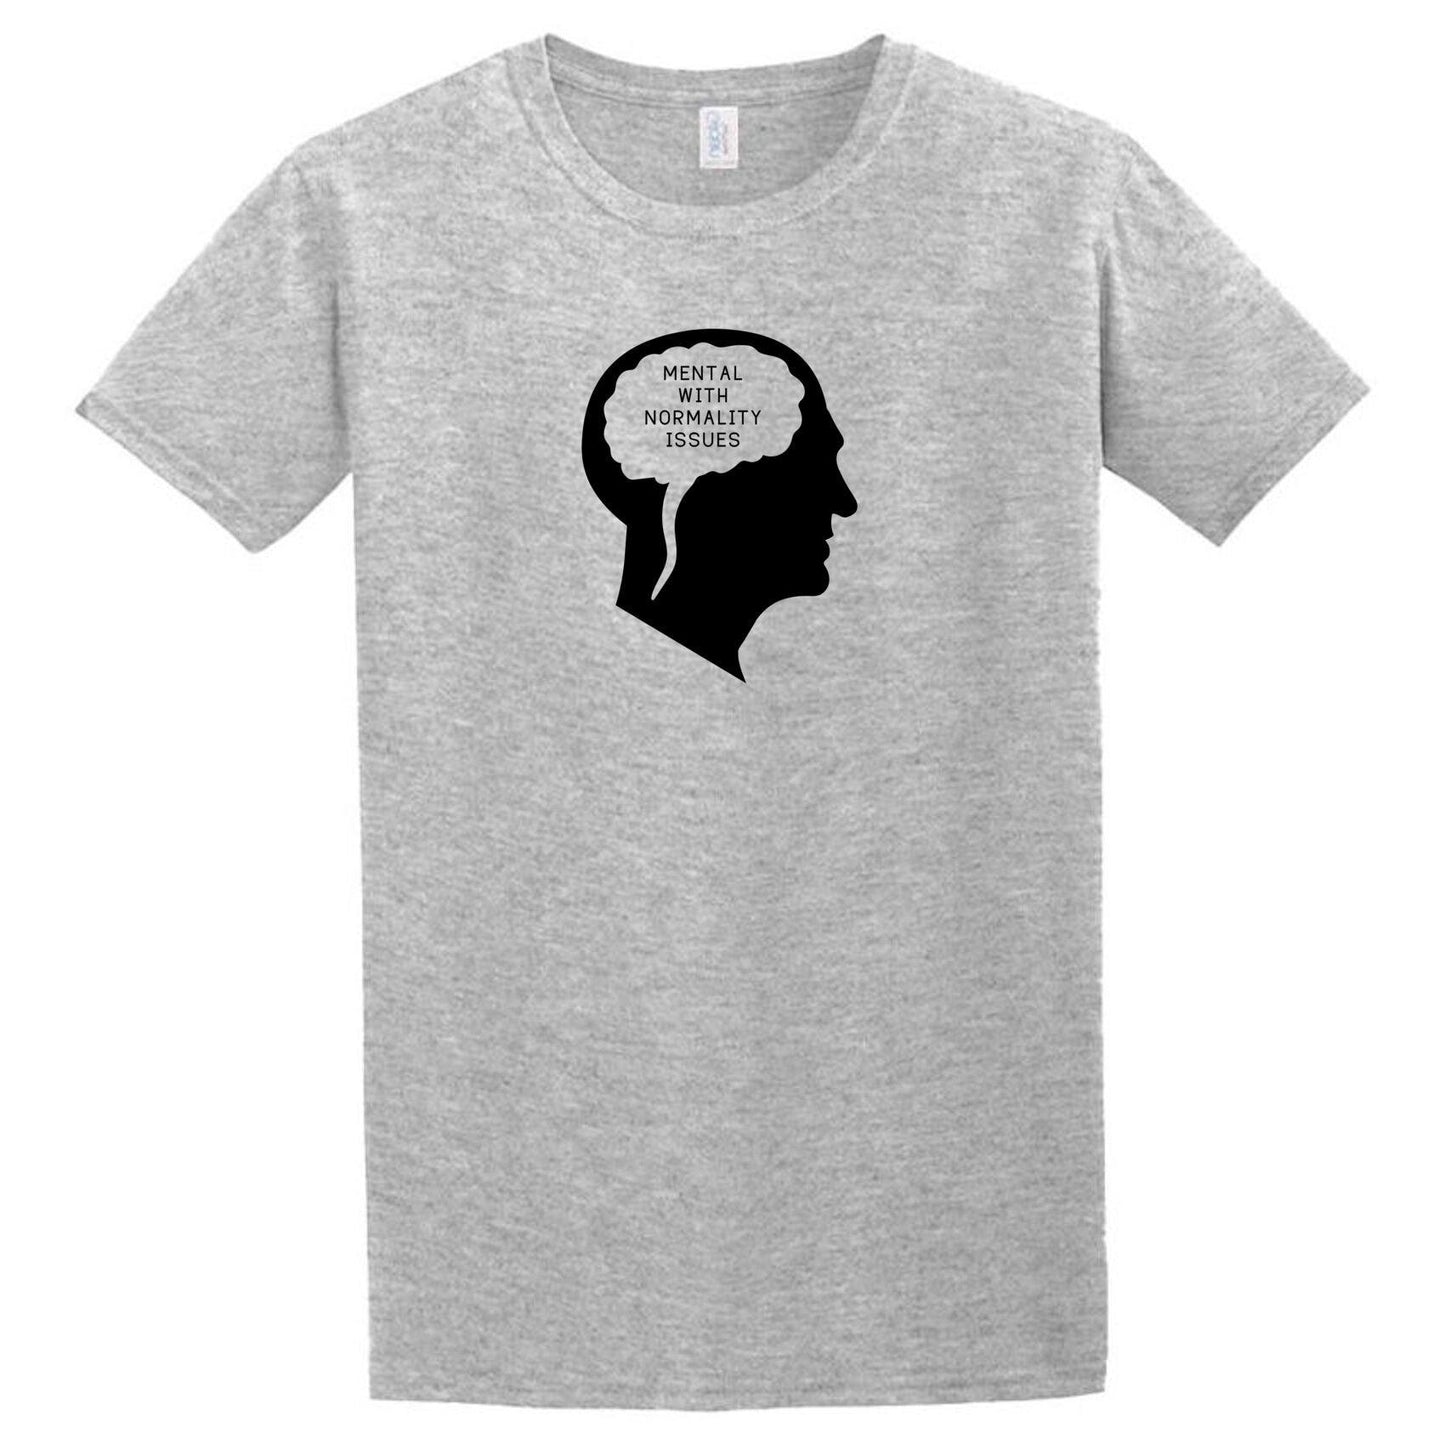 A Gray Normality T-Shirt with a silhouette of a man's head by Twisted Gifts.